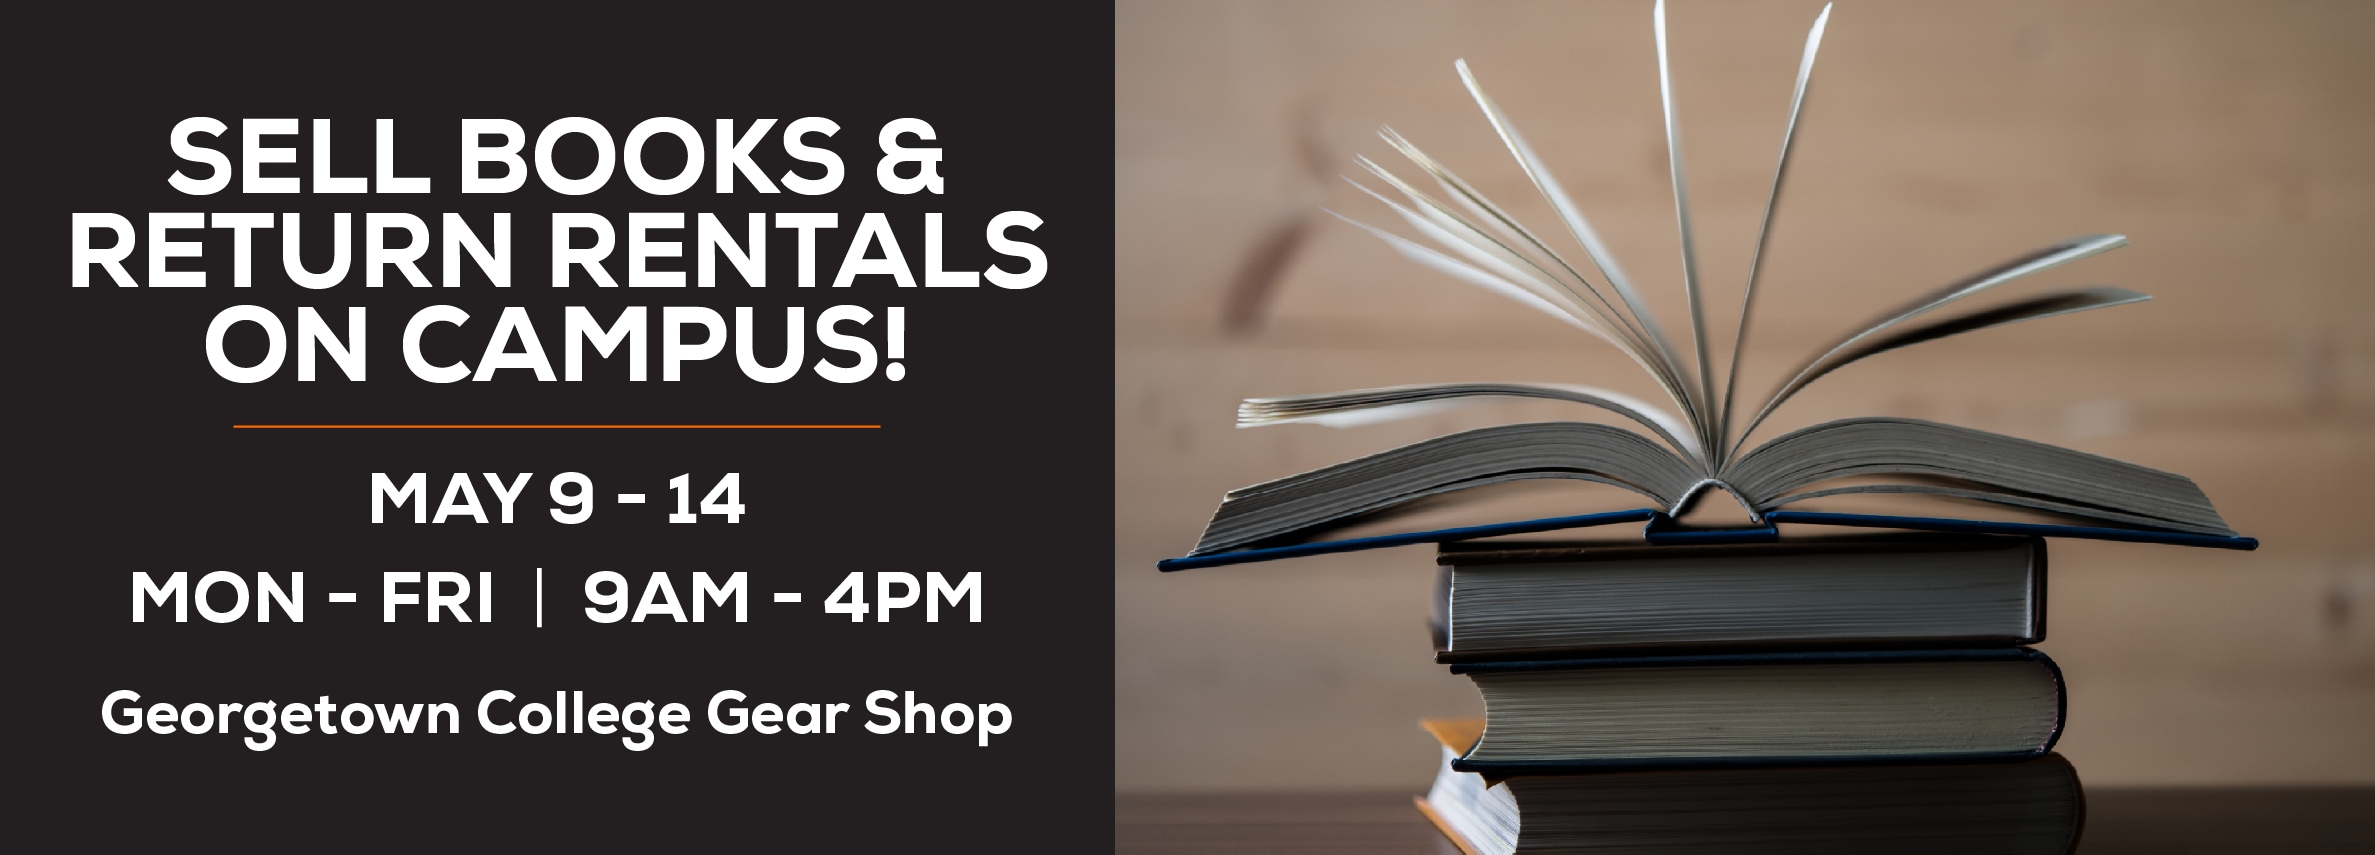 Sell books and return rentals on campus! May 9 - 14. Monday through Friday 9am to 4pm. Georgetown College Gear Shop.